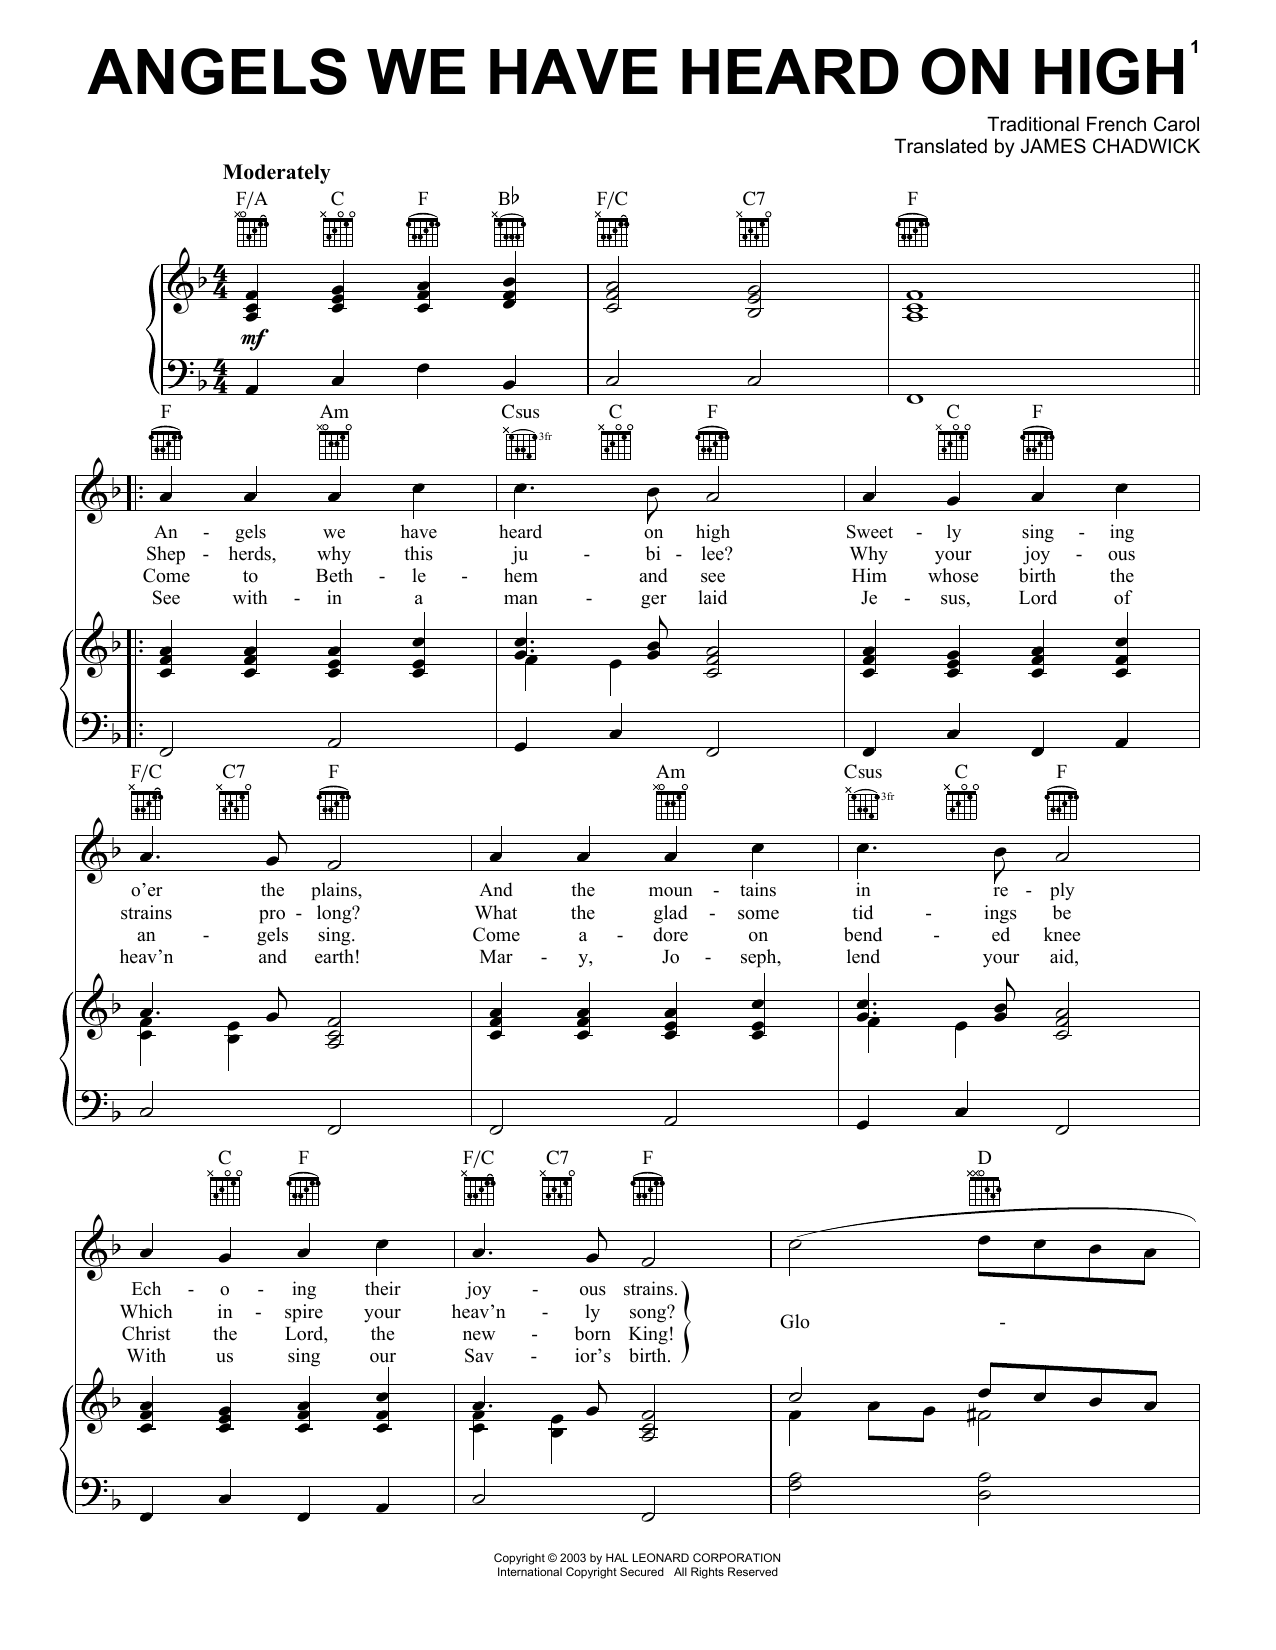 Christmas Carol Angels We Have Heard On High sheet music notes and chords. Download Printable PDF.